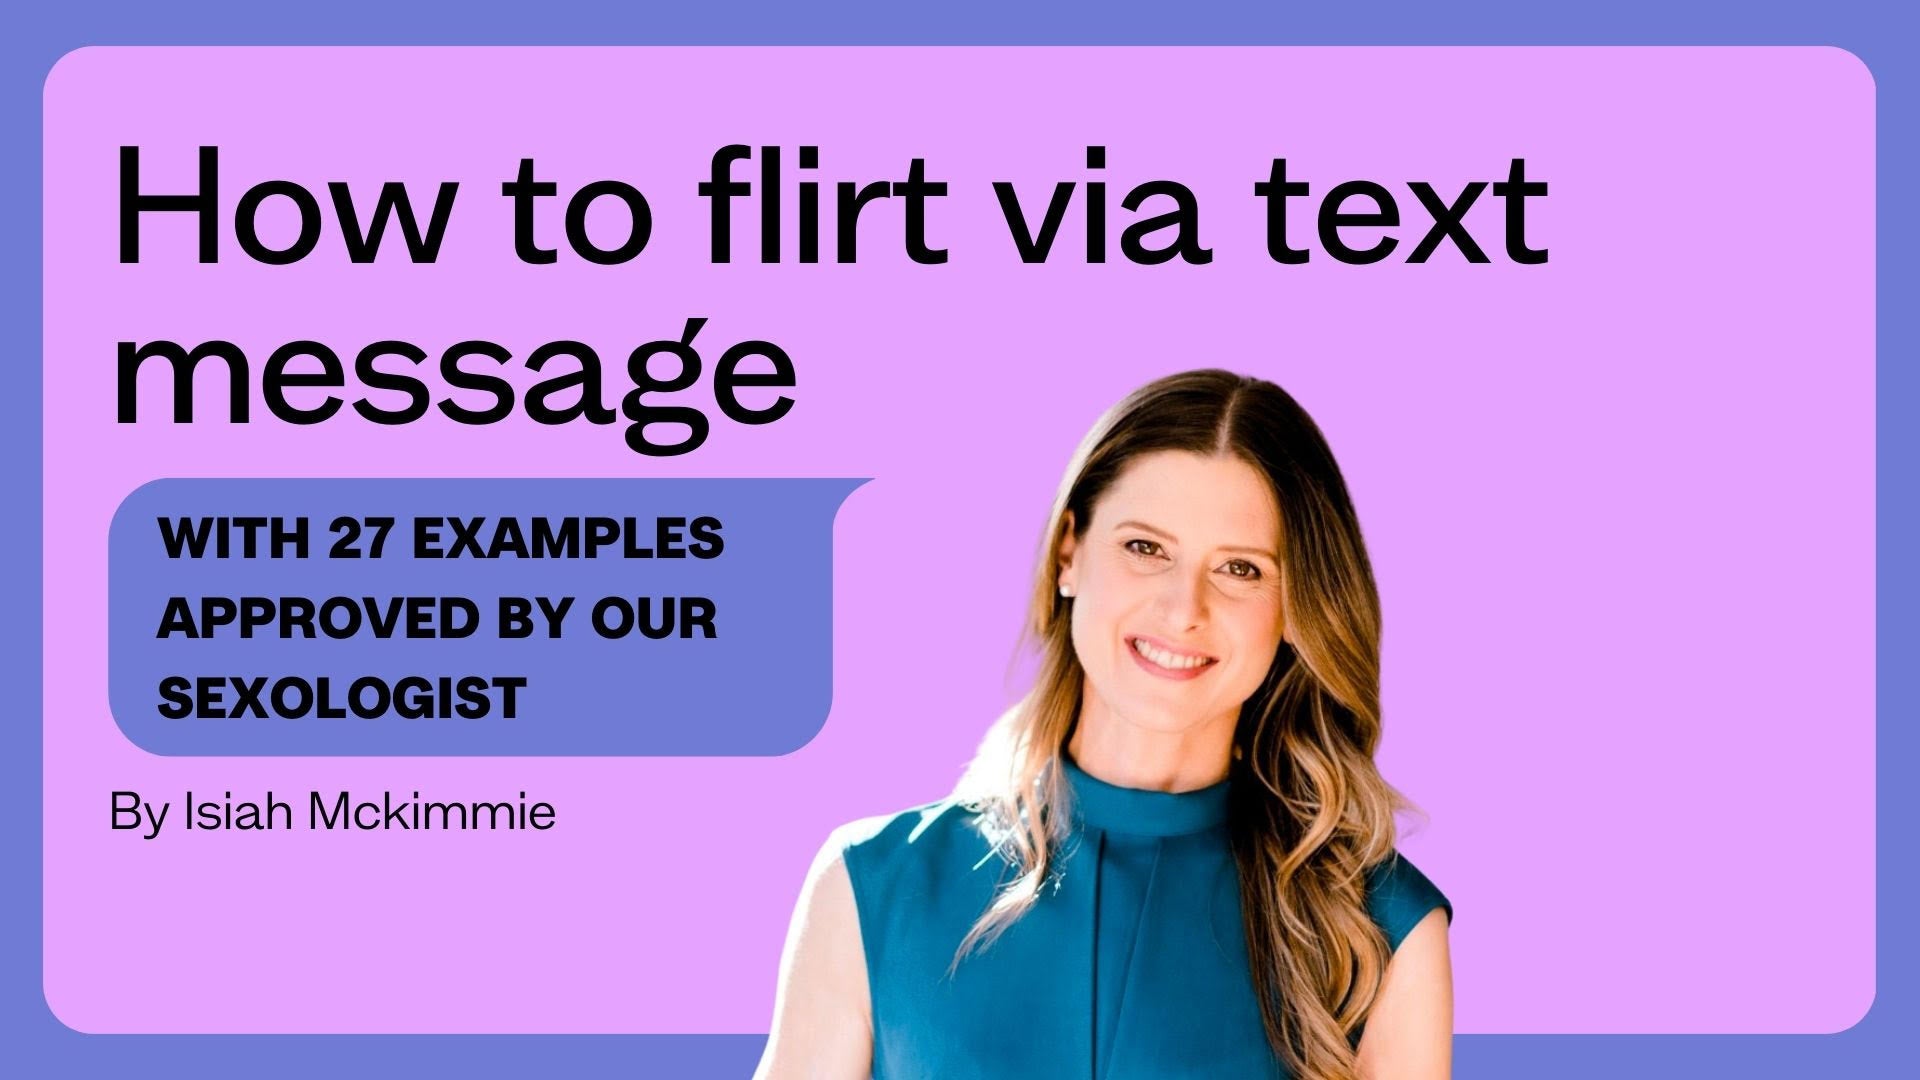 How to flirt via text message - with 27 examples approved by our Sexologist Isiah McKimmie